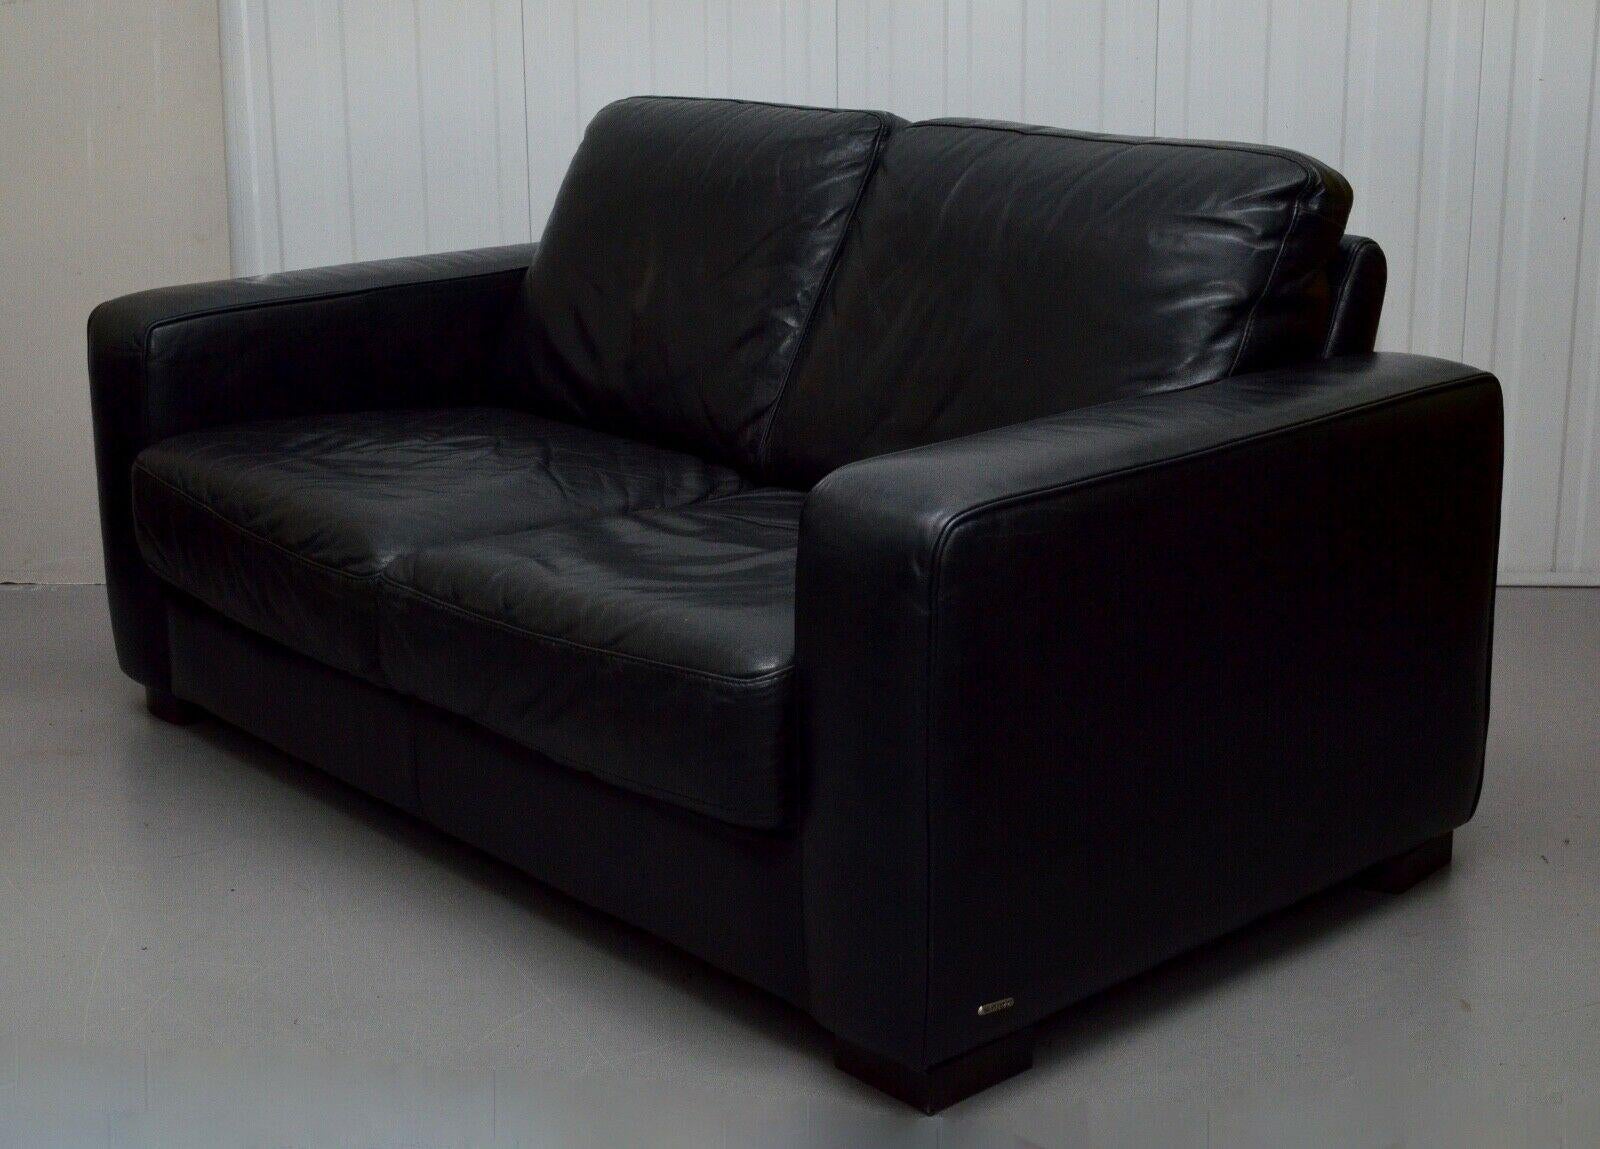 1 von 2 FINE NATUZZI BLACK LEATHER TWO SEATER SOFAS MATCING ARMCHAIR AVAILABLE im Angebot 2